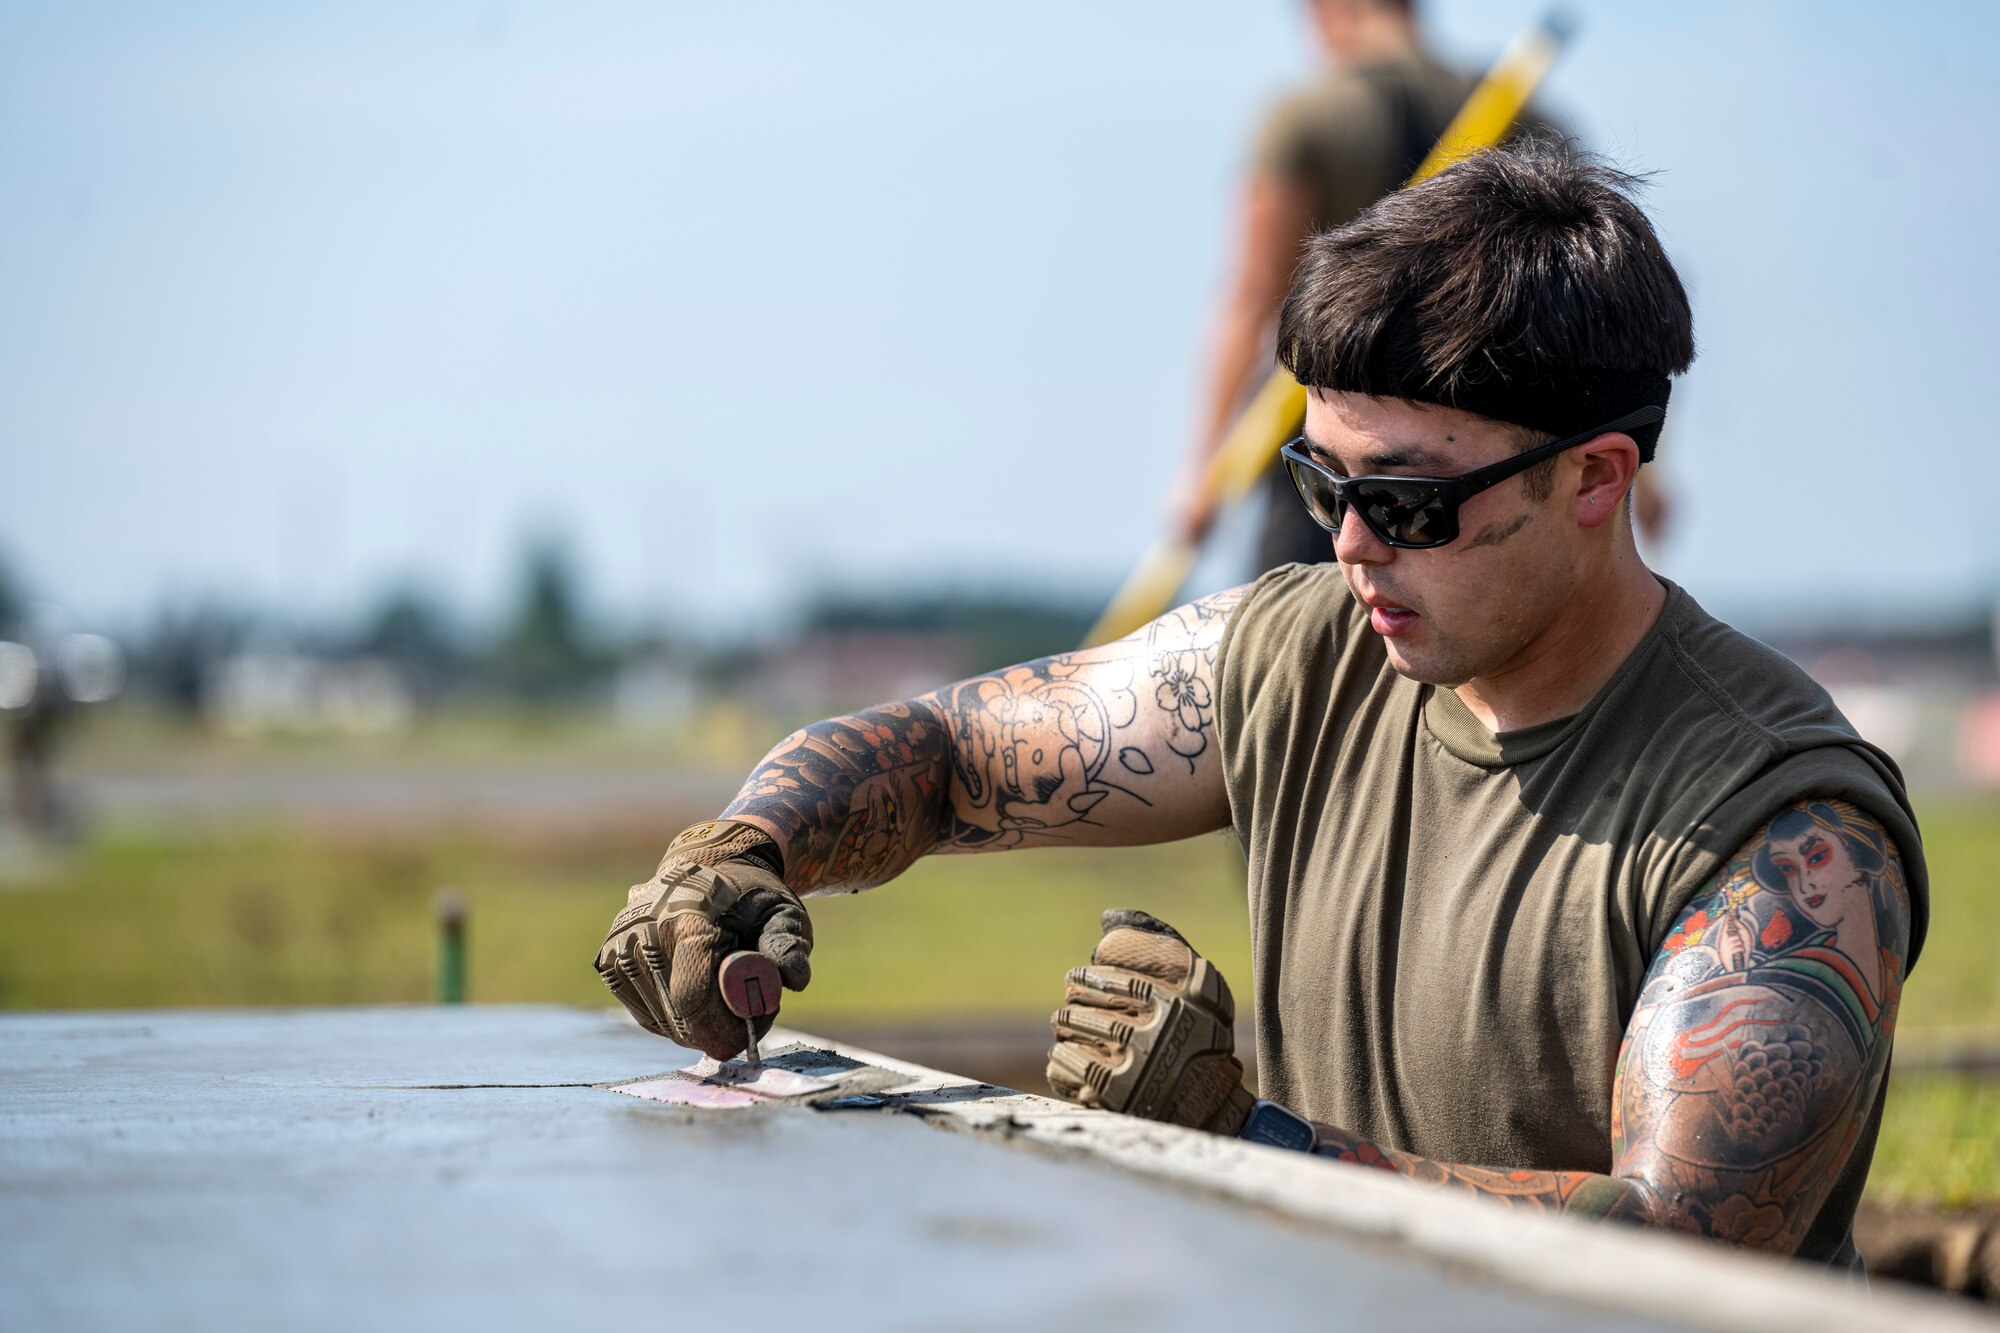 An Airman soothes wet concrete with a trowel.